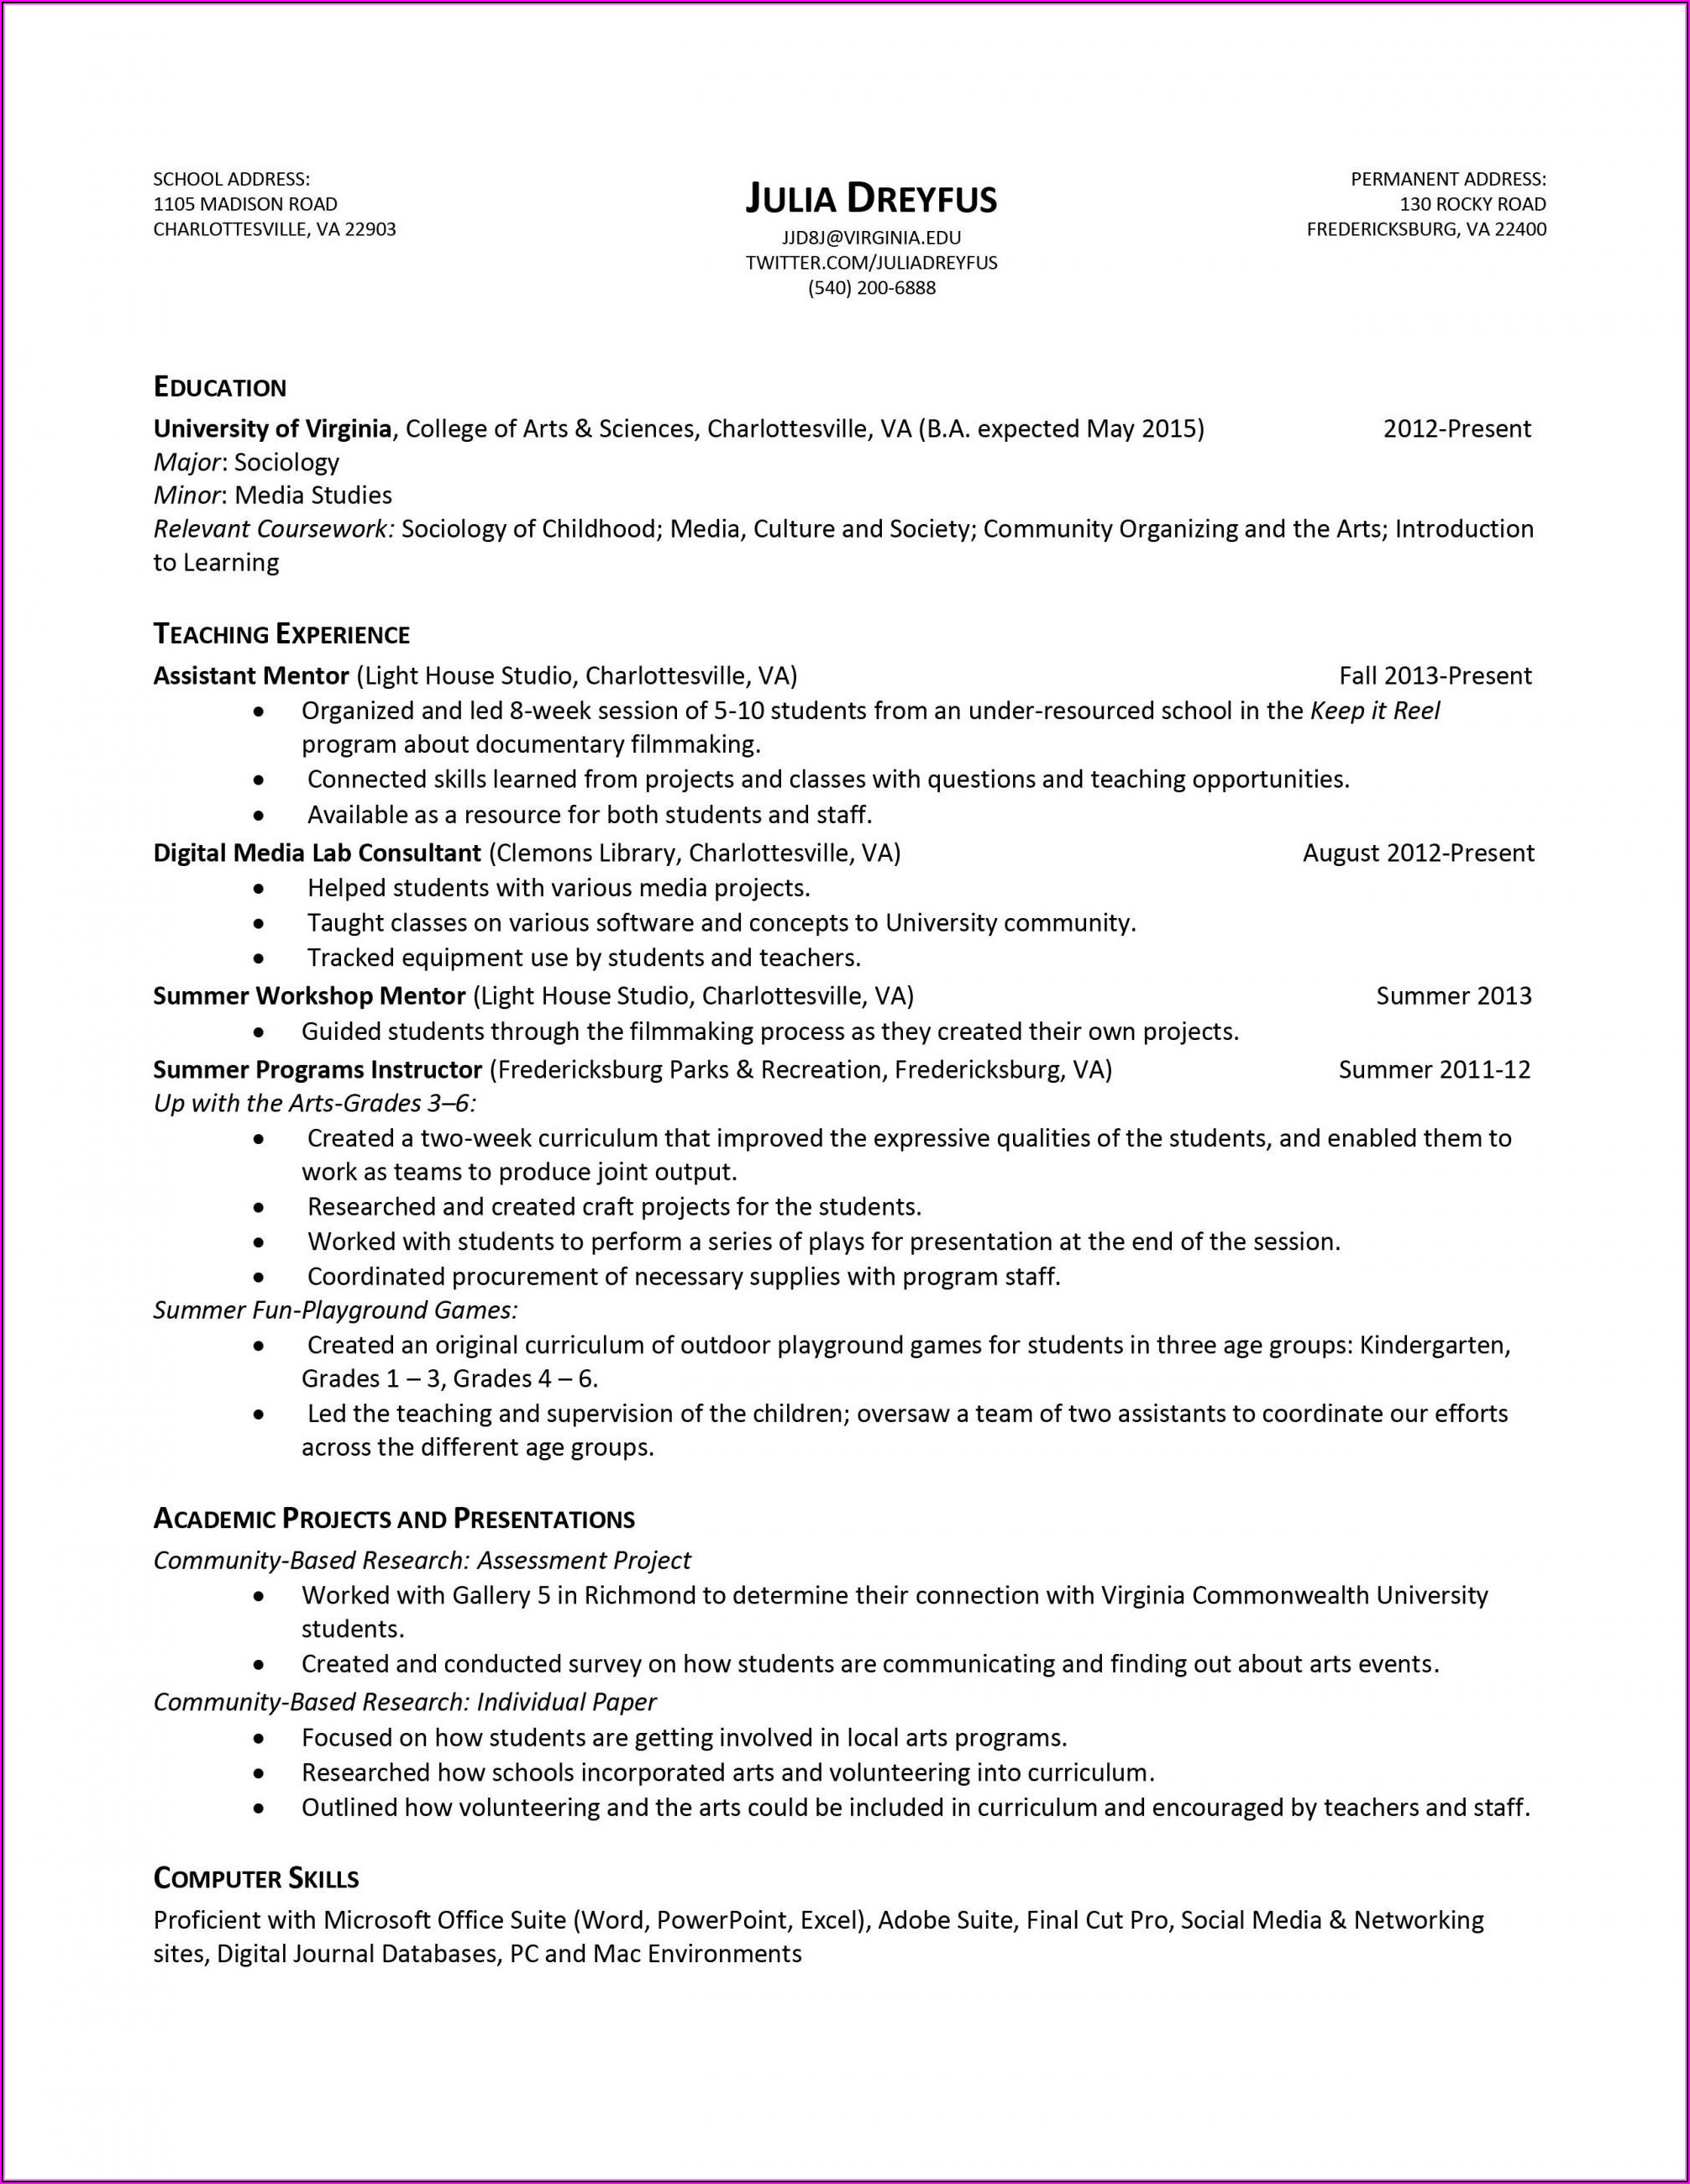 Military Spouse Federal Resume